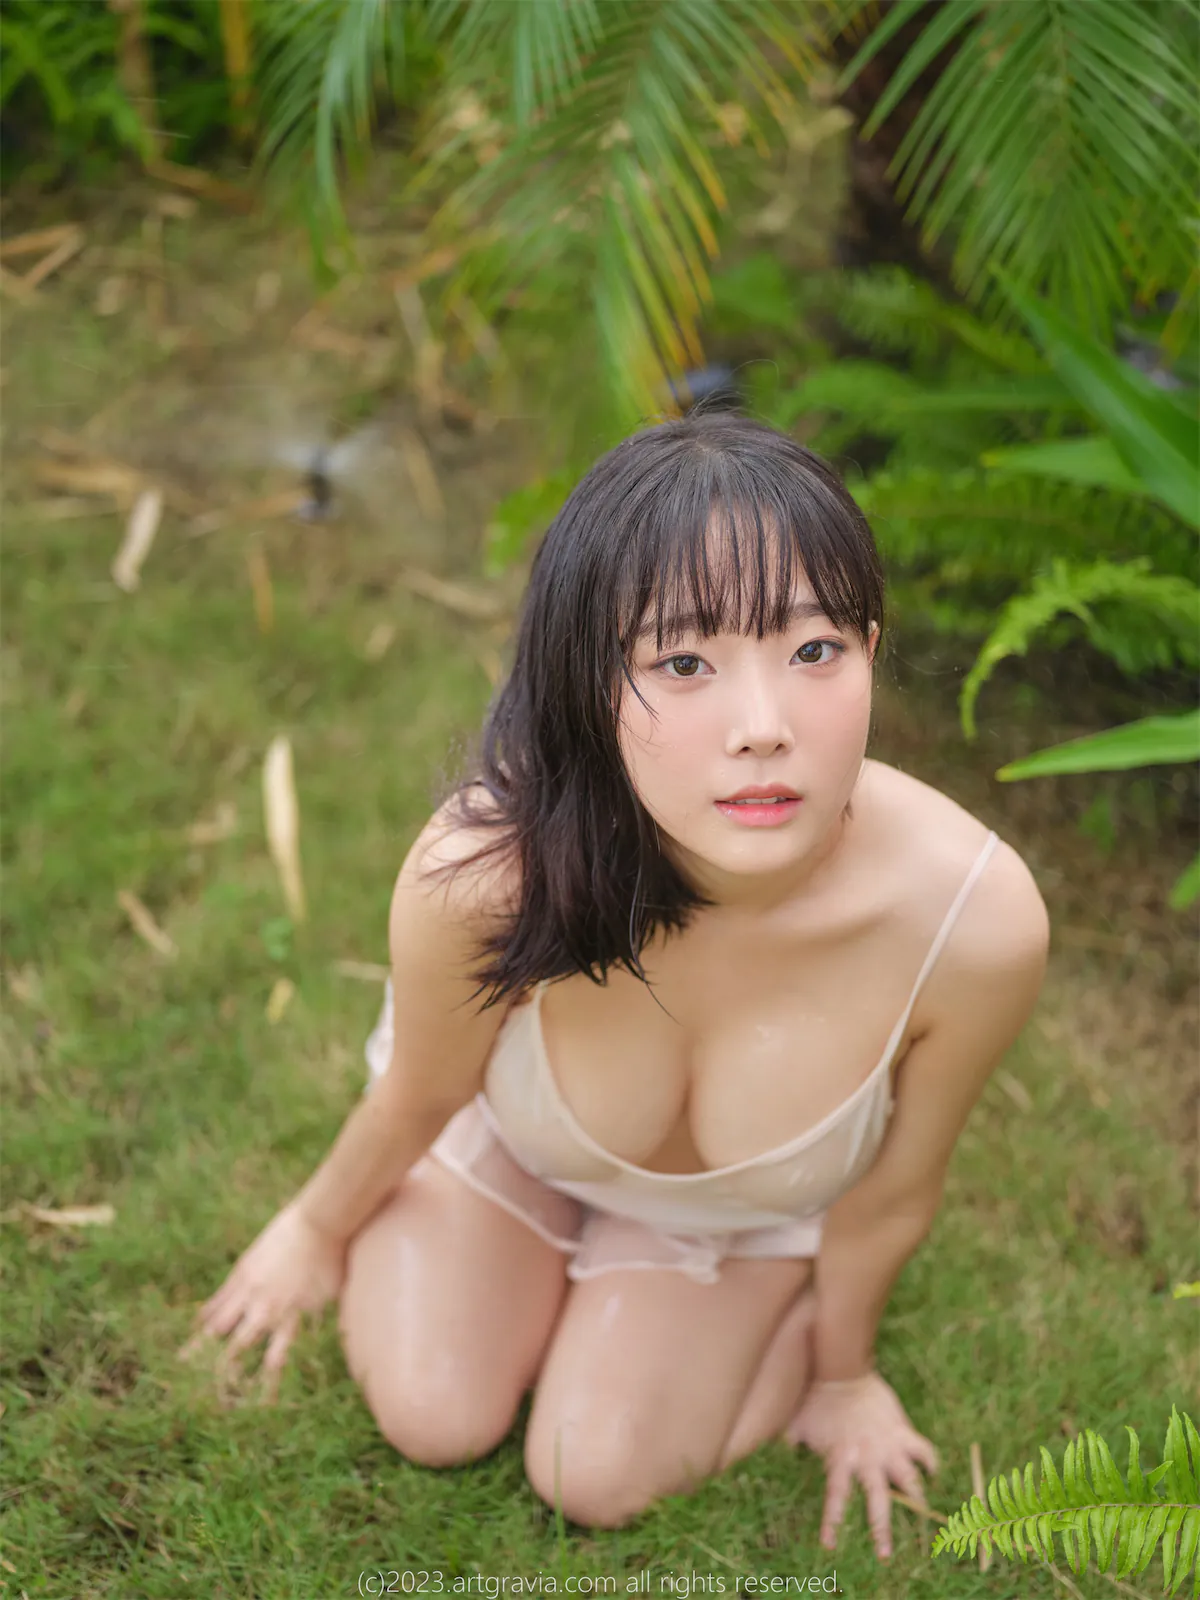 AG.492-Kang-In-kyung-coszip.com-073